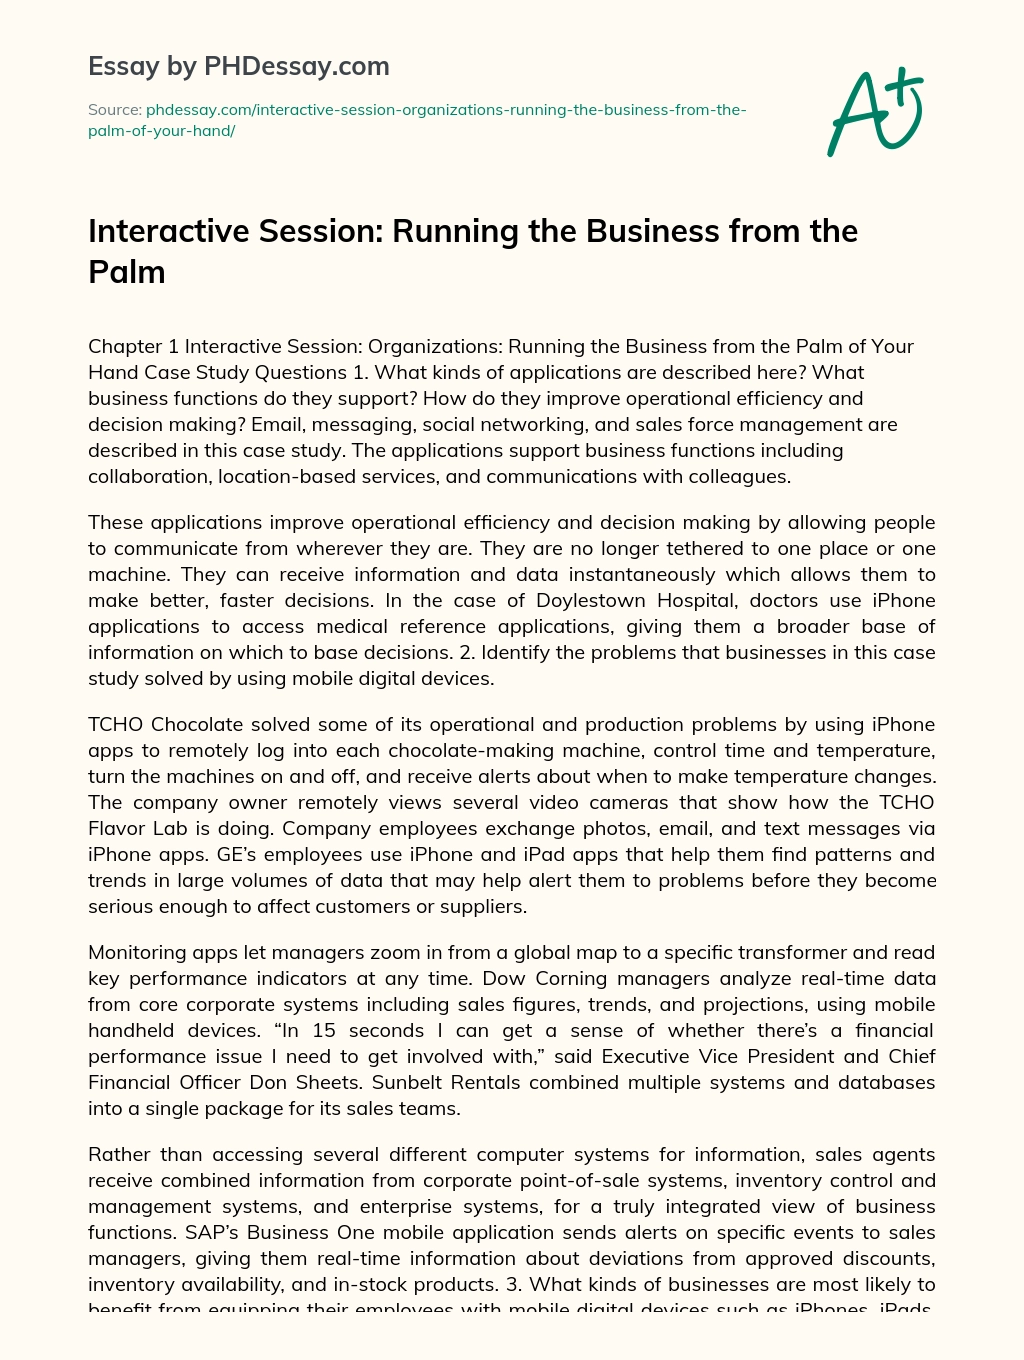 Interactive Session: Running the Business from the Palm essay